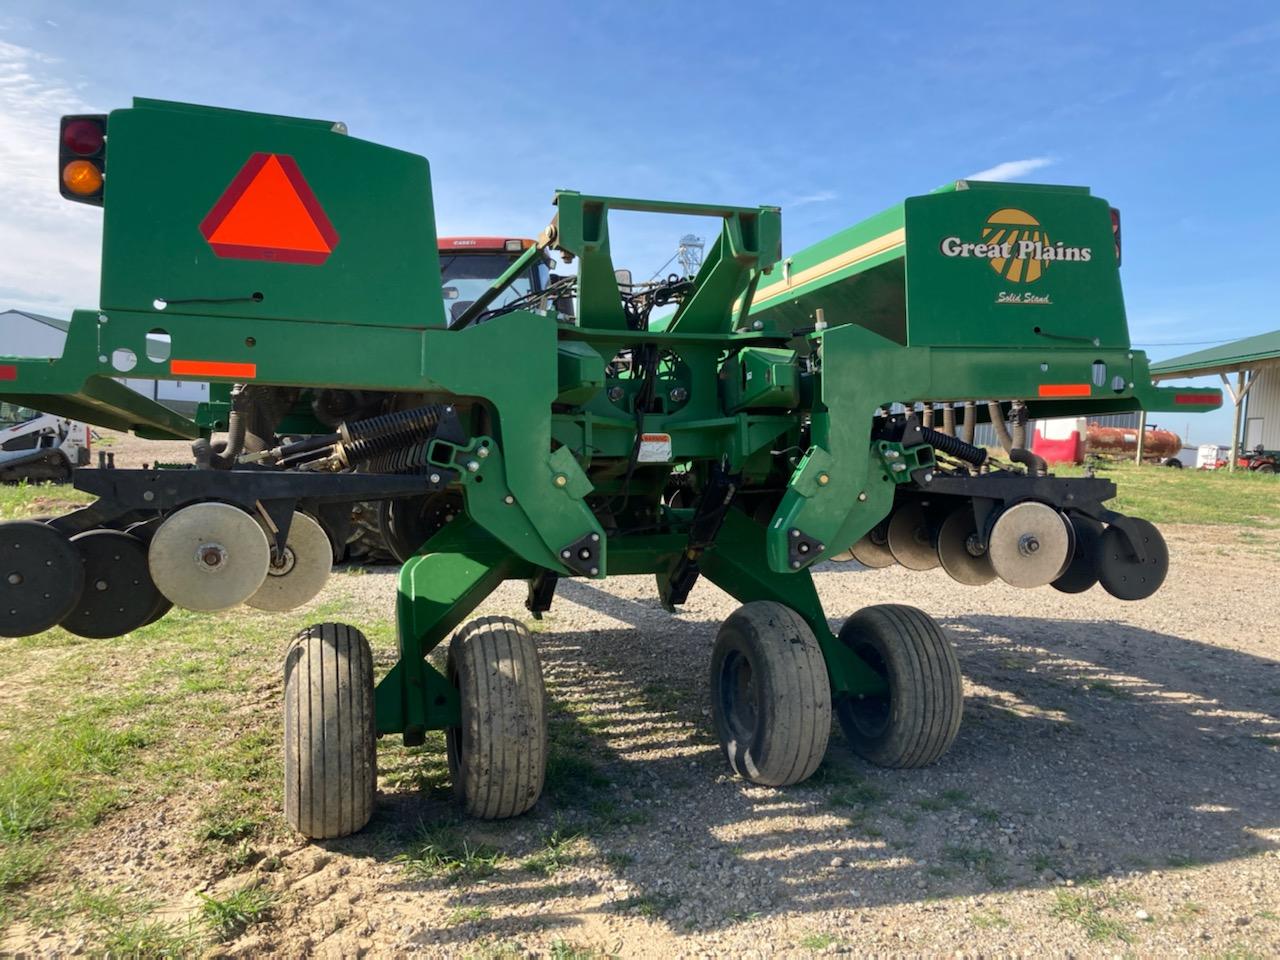 2014 Great Plains 2S2600HD 2 section 26' folding drill for sale in Laurel, NE.  